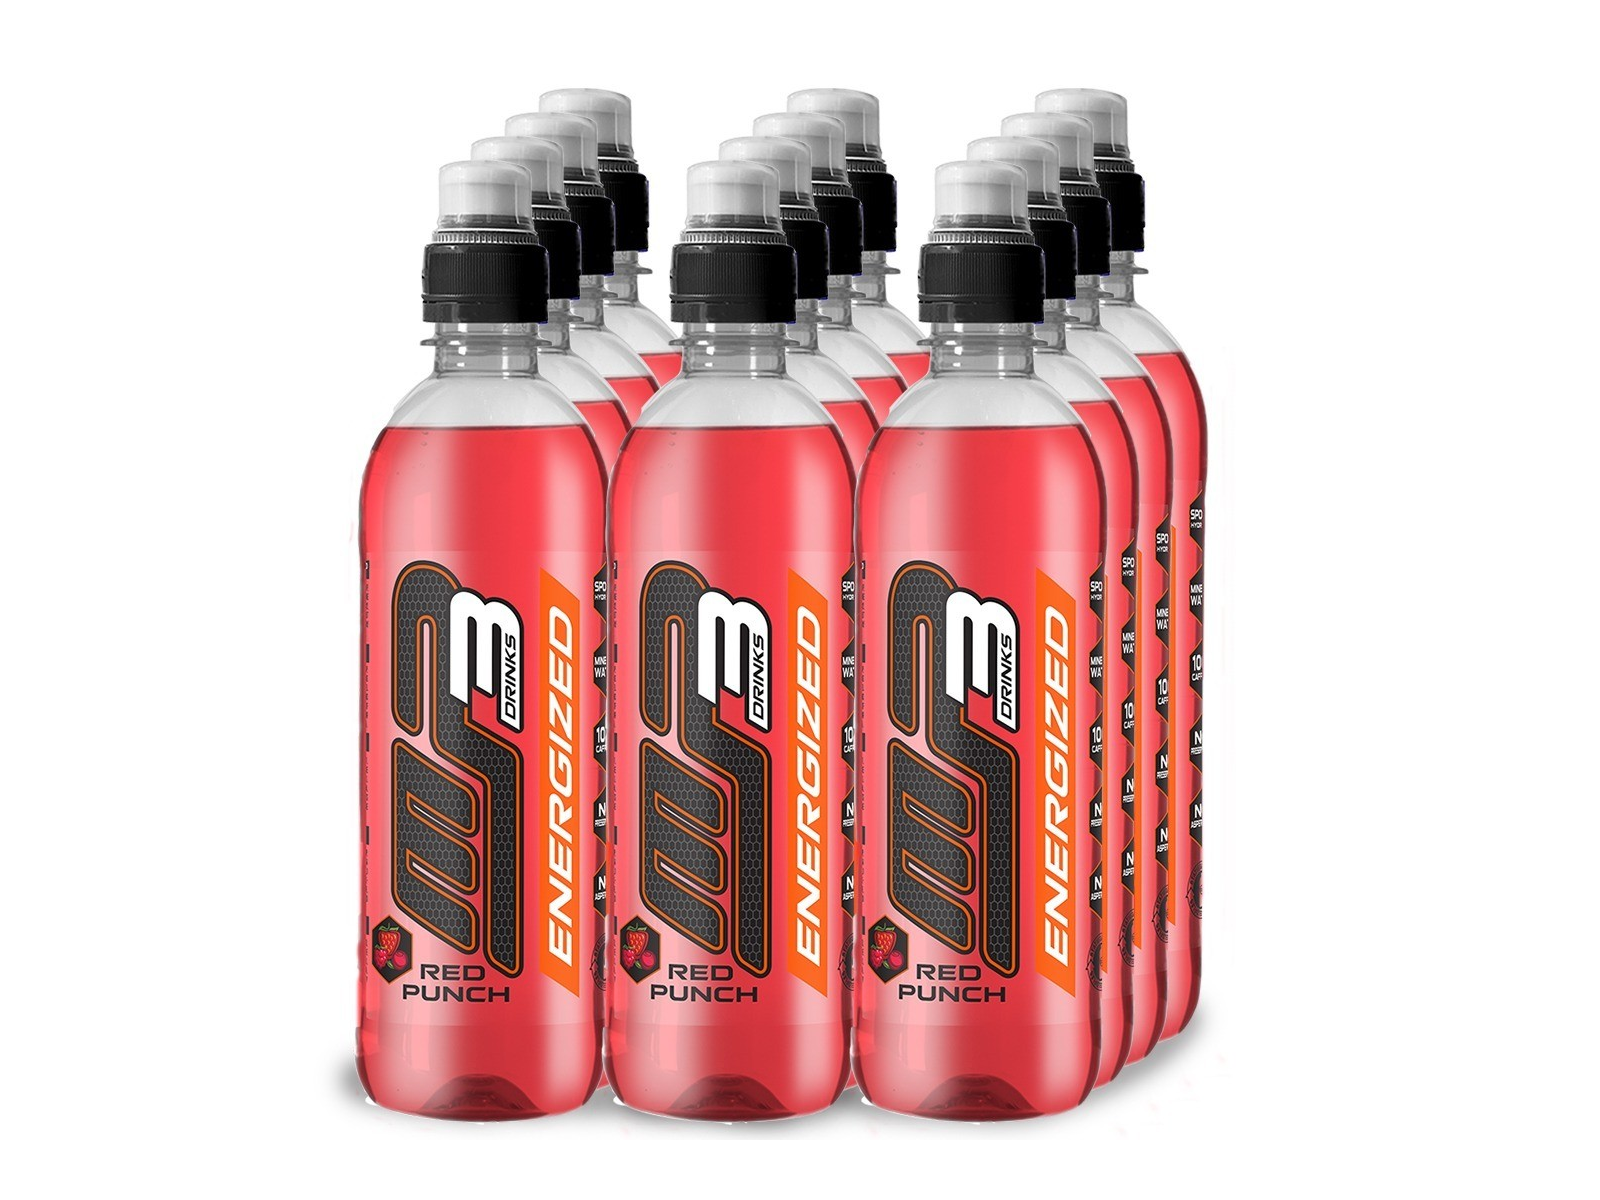 Energized (12-pack) (Red Punch - 24 x 500 ml) - MP3 DRINKS